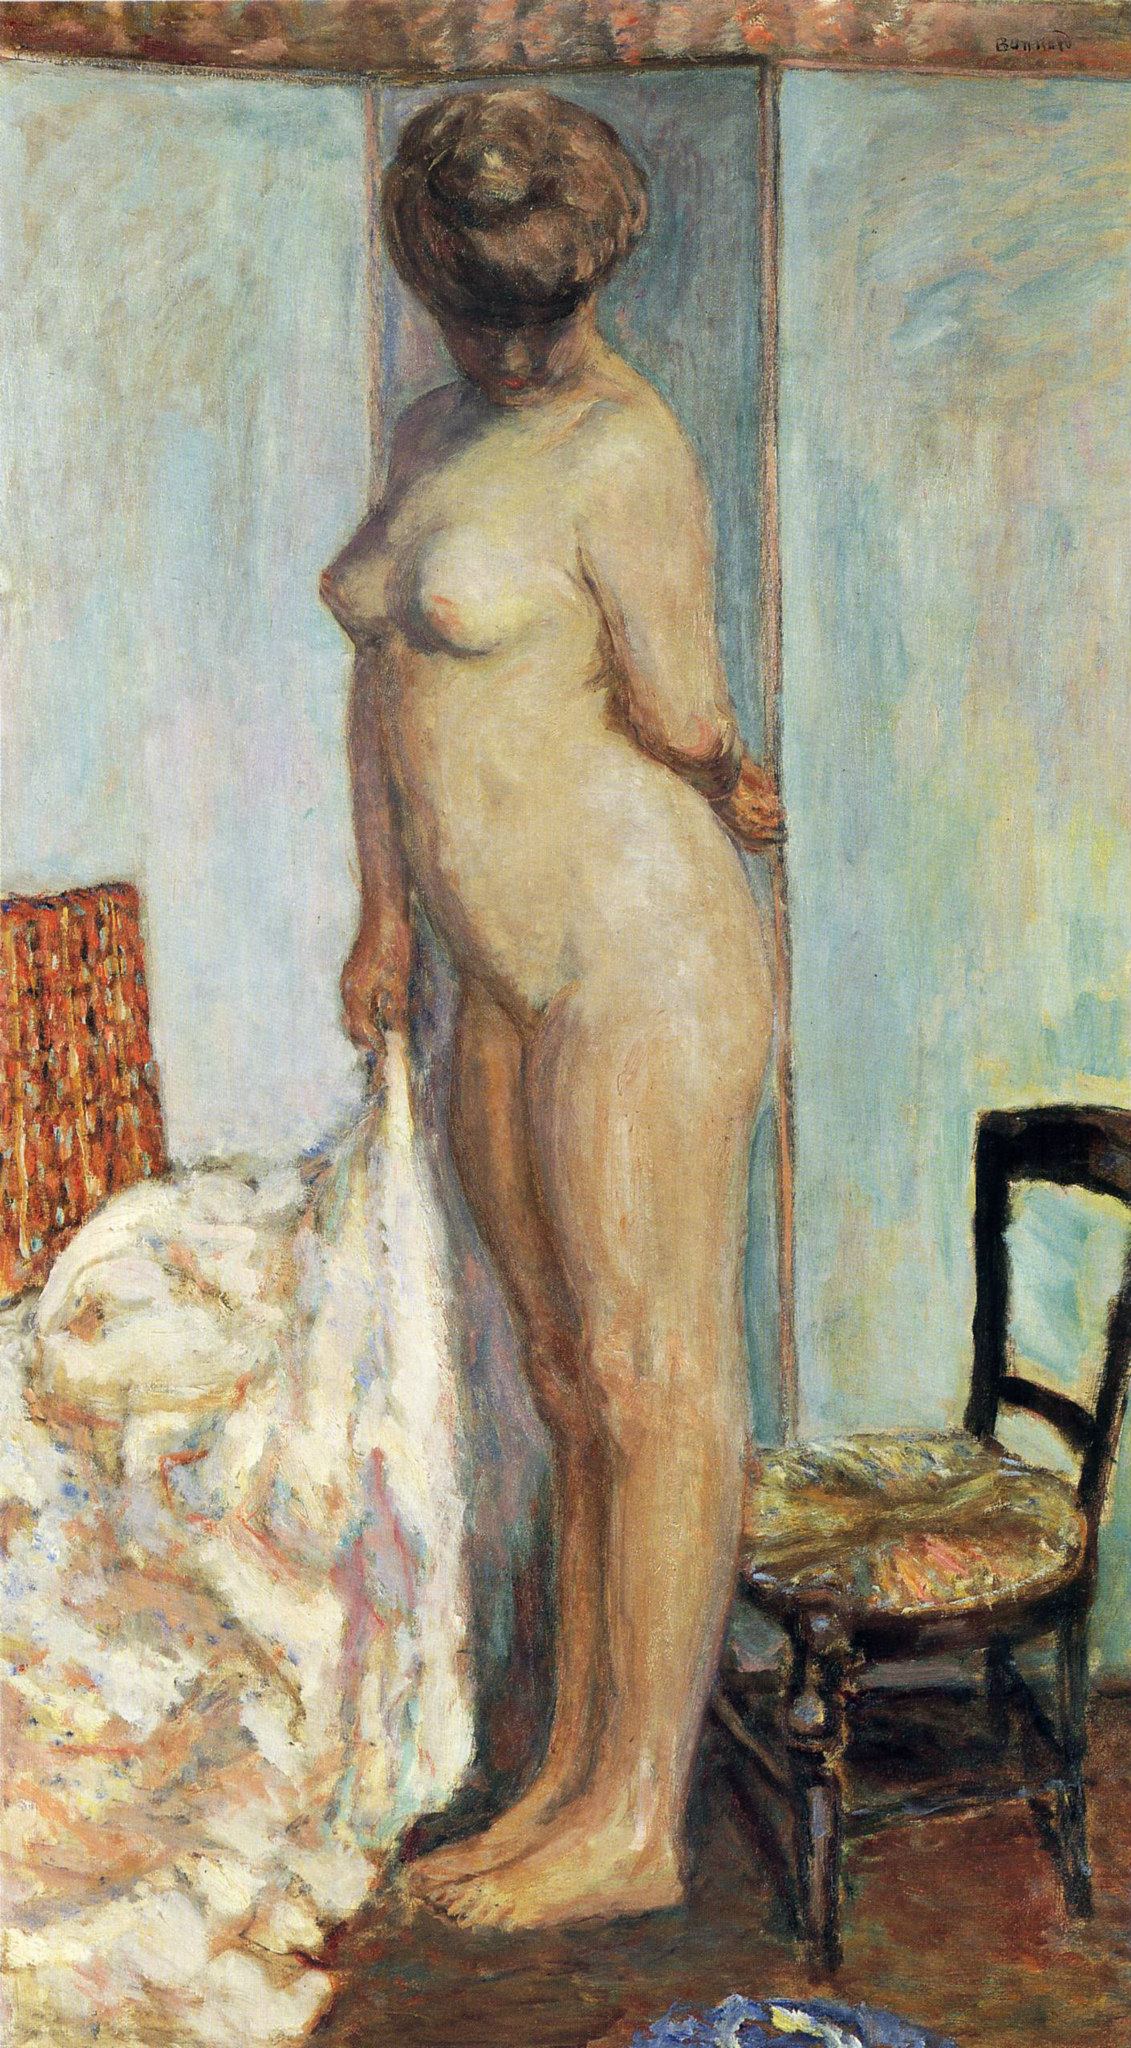 Tall Nude (Also Known As Woman Nude Standing), Pierre Bonnard, 1906